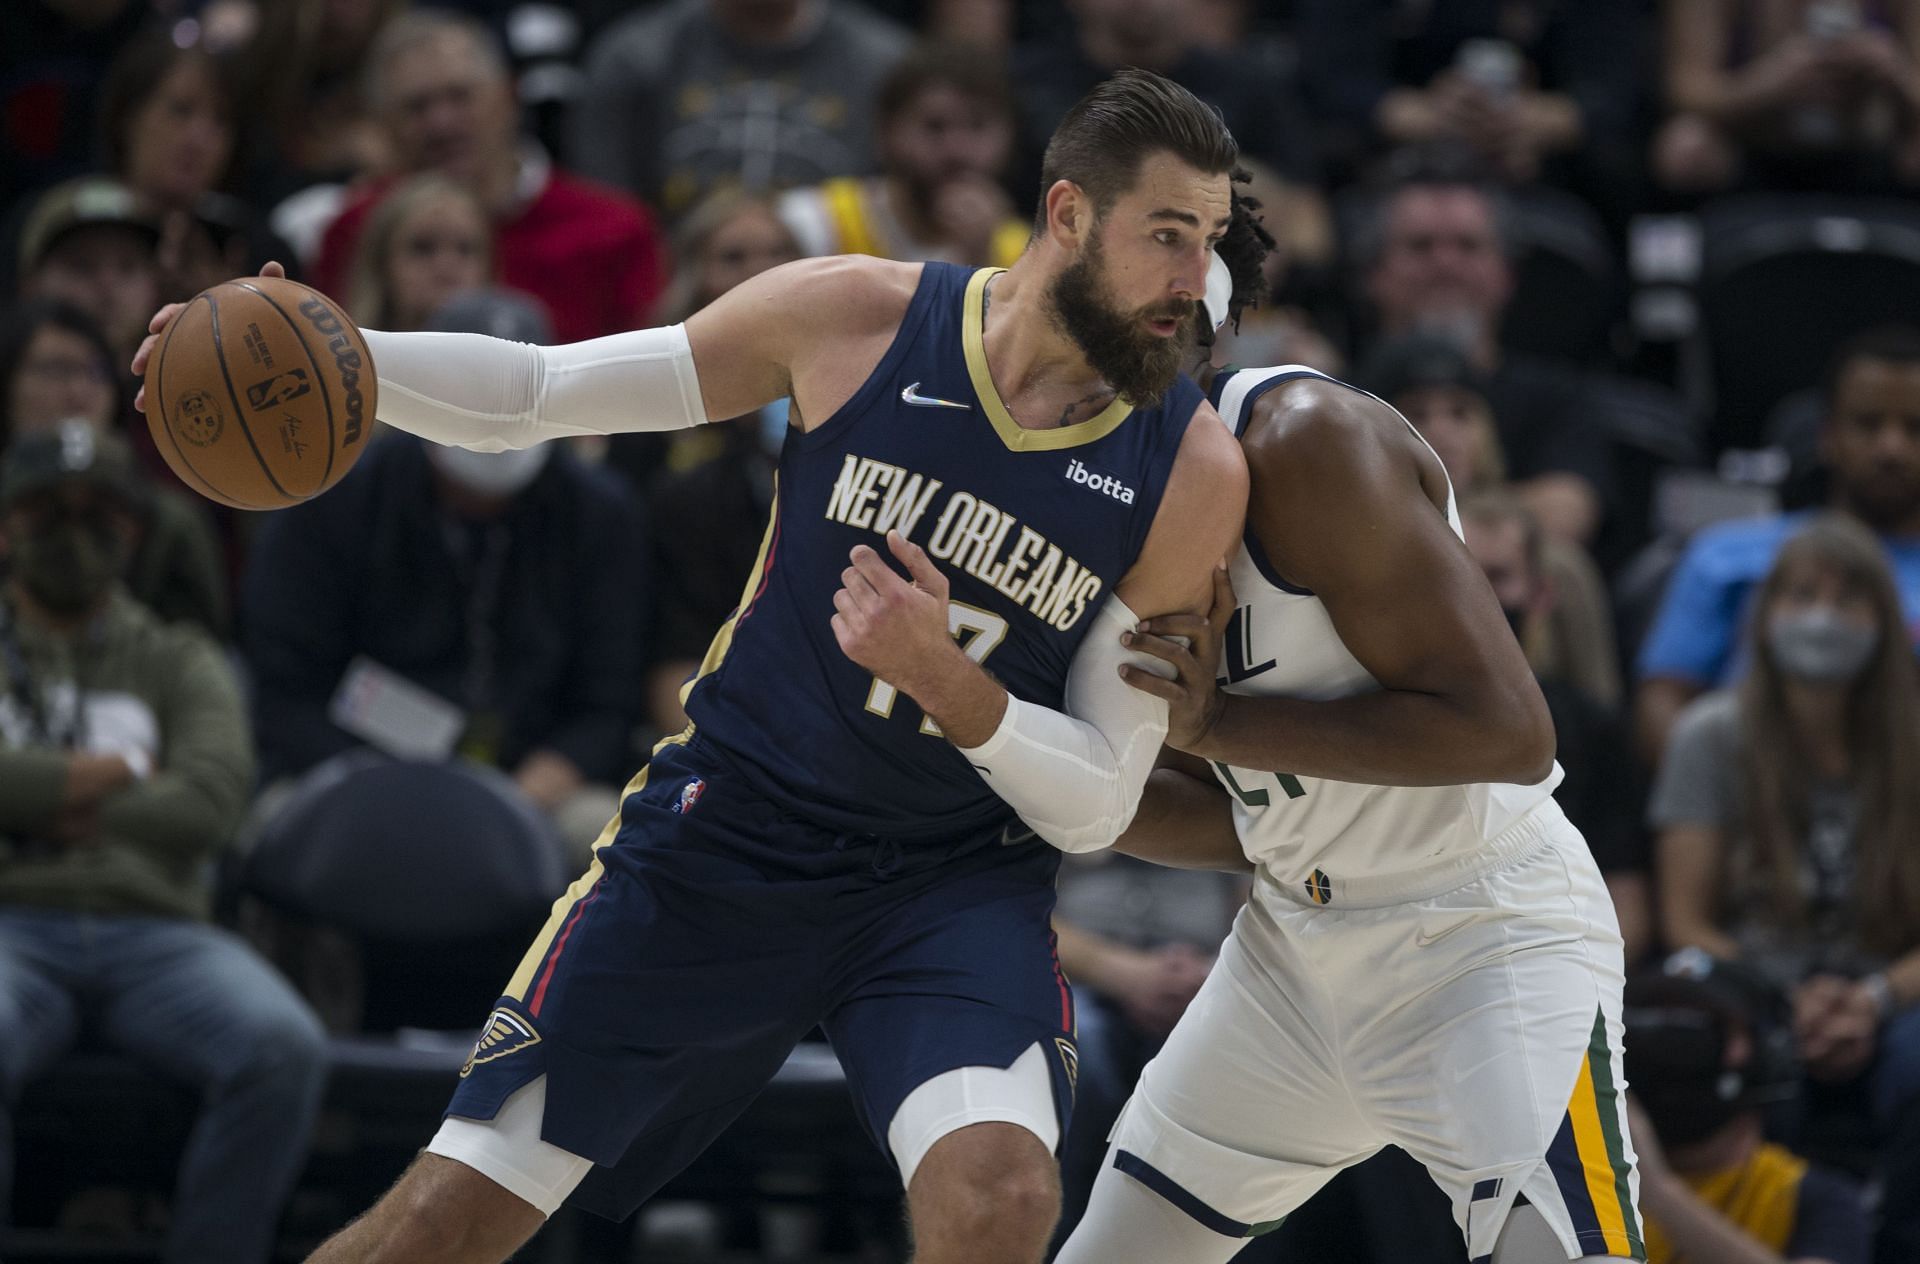 Jonas Valanciunas #17 of the New Orleans Pelicans backs down Hassan Whiteside #21 of the Utah Jazz as he works his way to the basket during the first half of their game on October 11, 2021 at the Vivint Smart Home Arena in Salt Lake City, Utah.